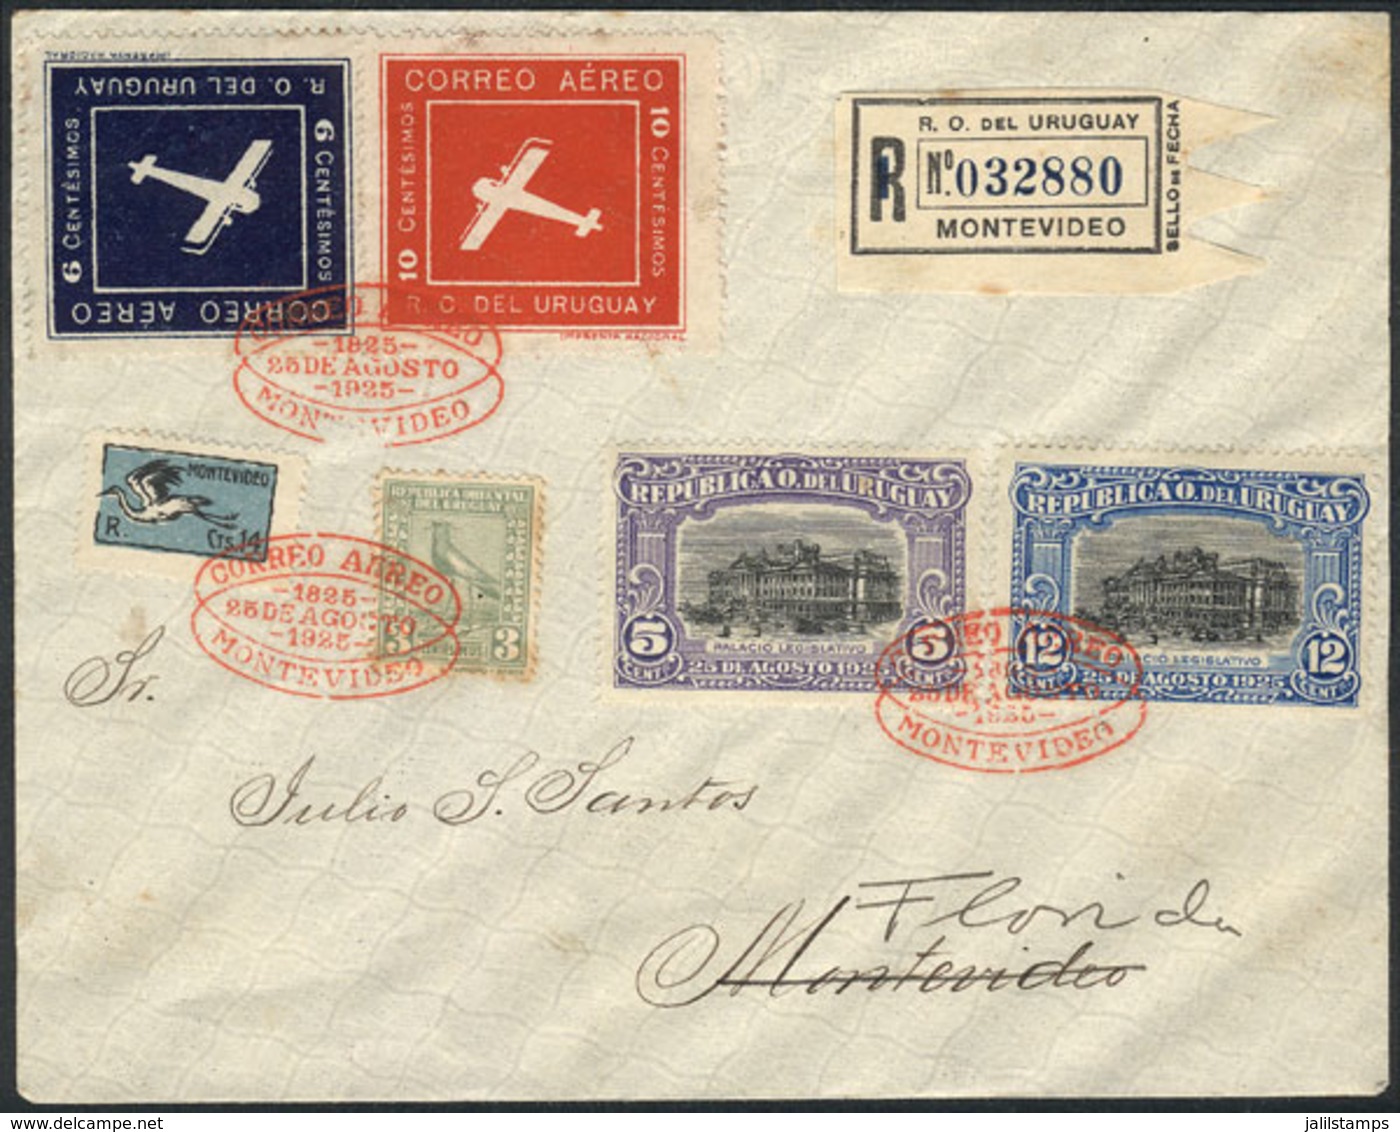 943 URUGUAY: 25/AU/1925 First Flight Montevideo-Florida: Registered Cover With Nice Postage, VF Quality. - Uruguay